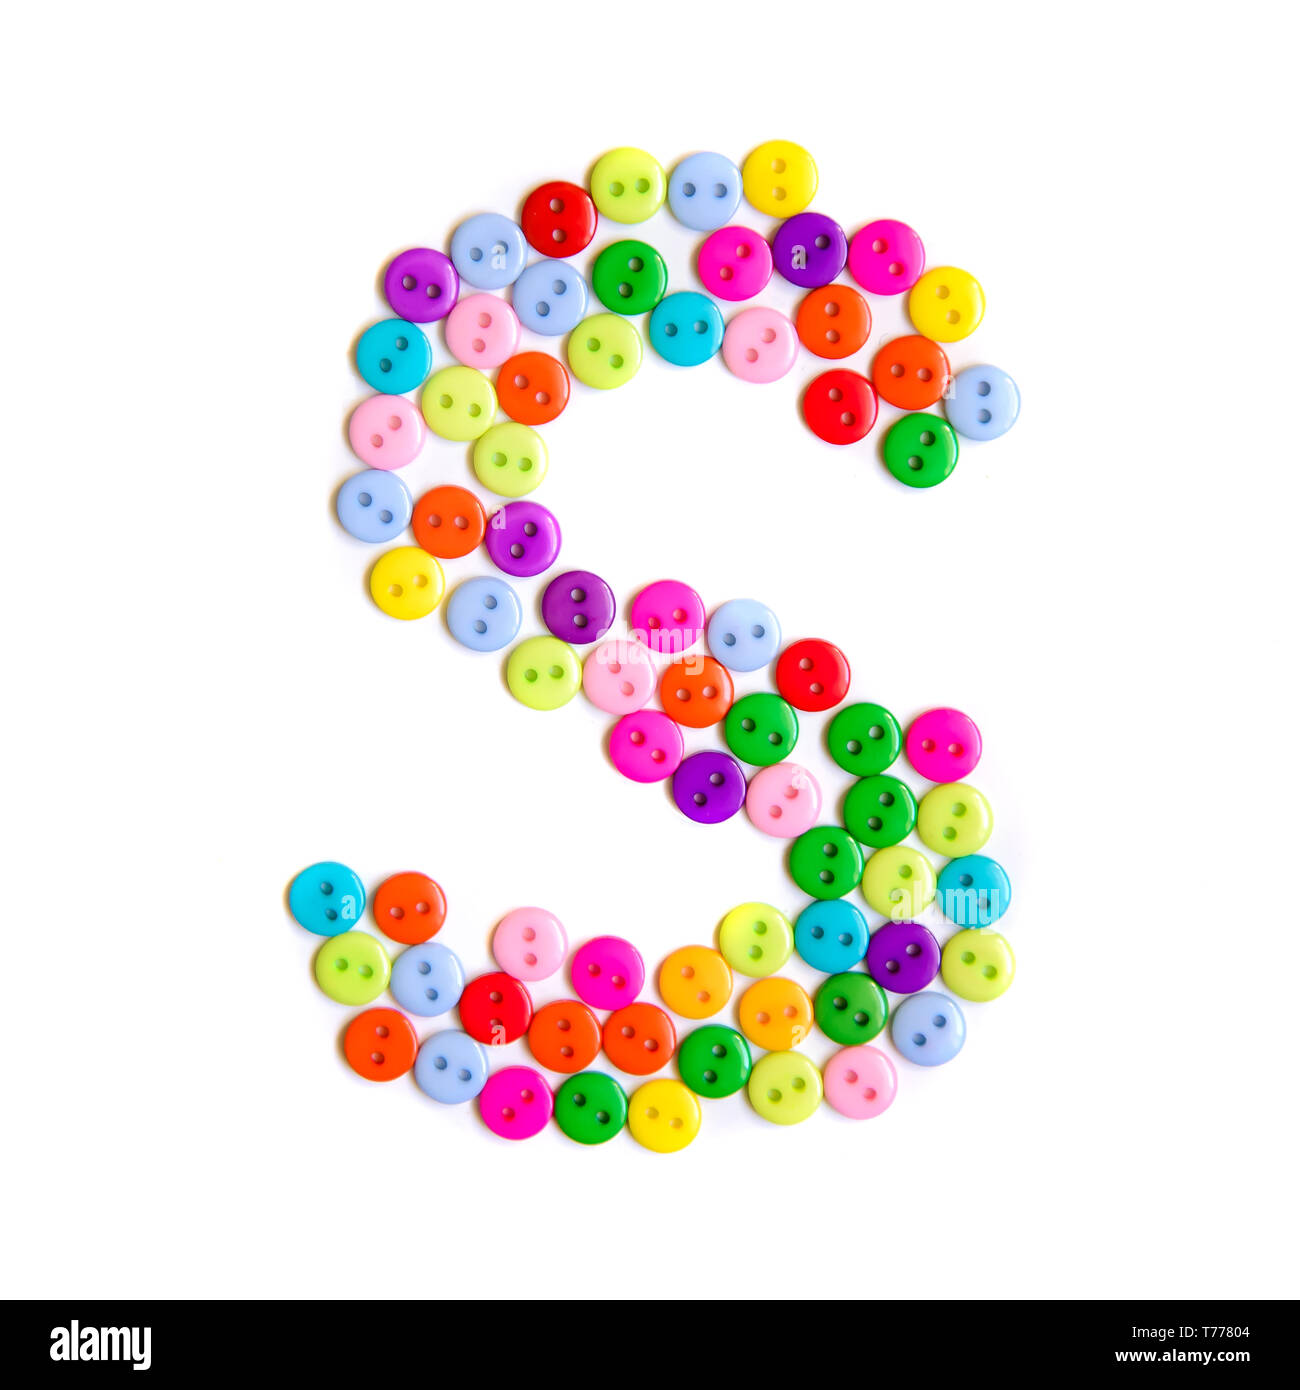 Letter S of the English alphabet from a group of colorful small buttons on a white background Stock Photo